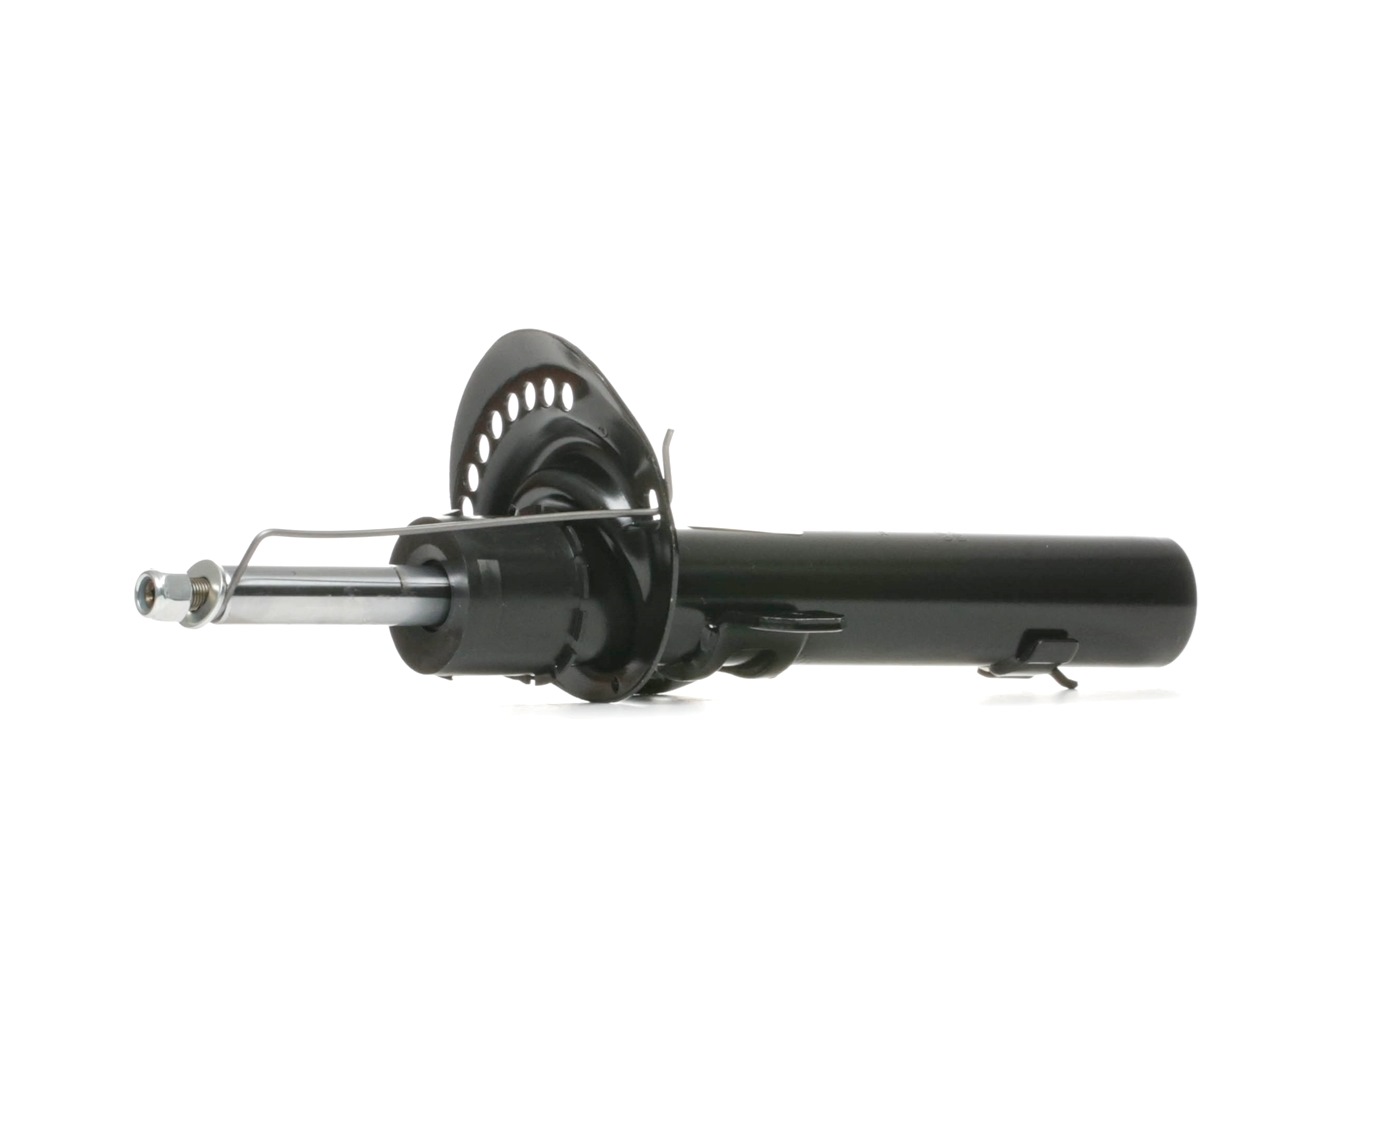 MAGNETI MARELLI 352514070000 Shock absorber Front Axle, Gas Pressure, Twin-Tube, Suspension Strut, Top pin